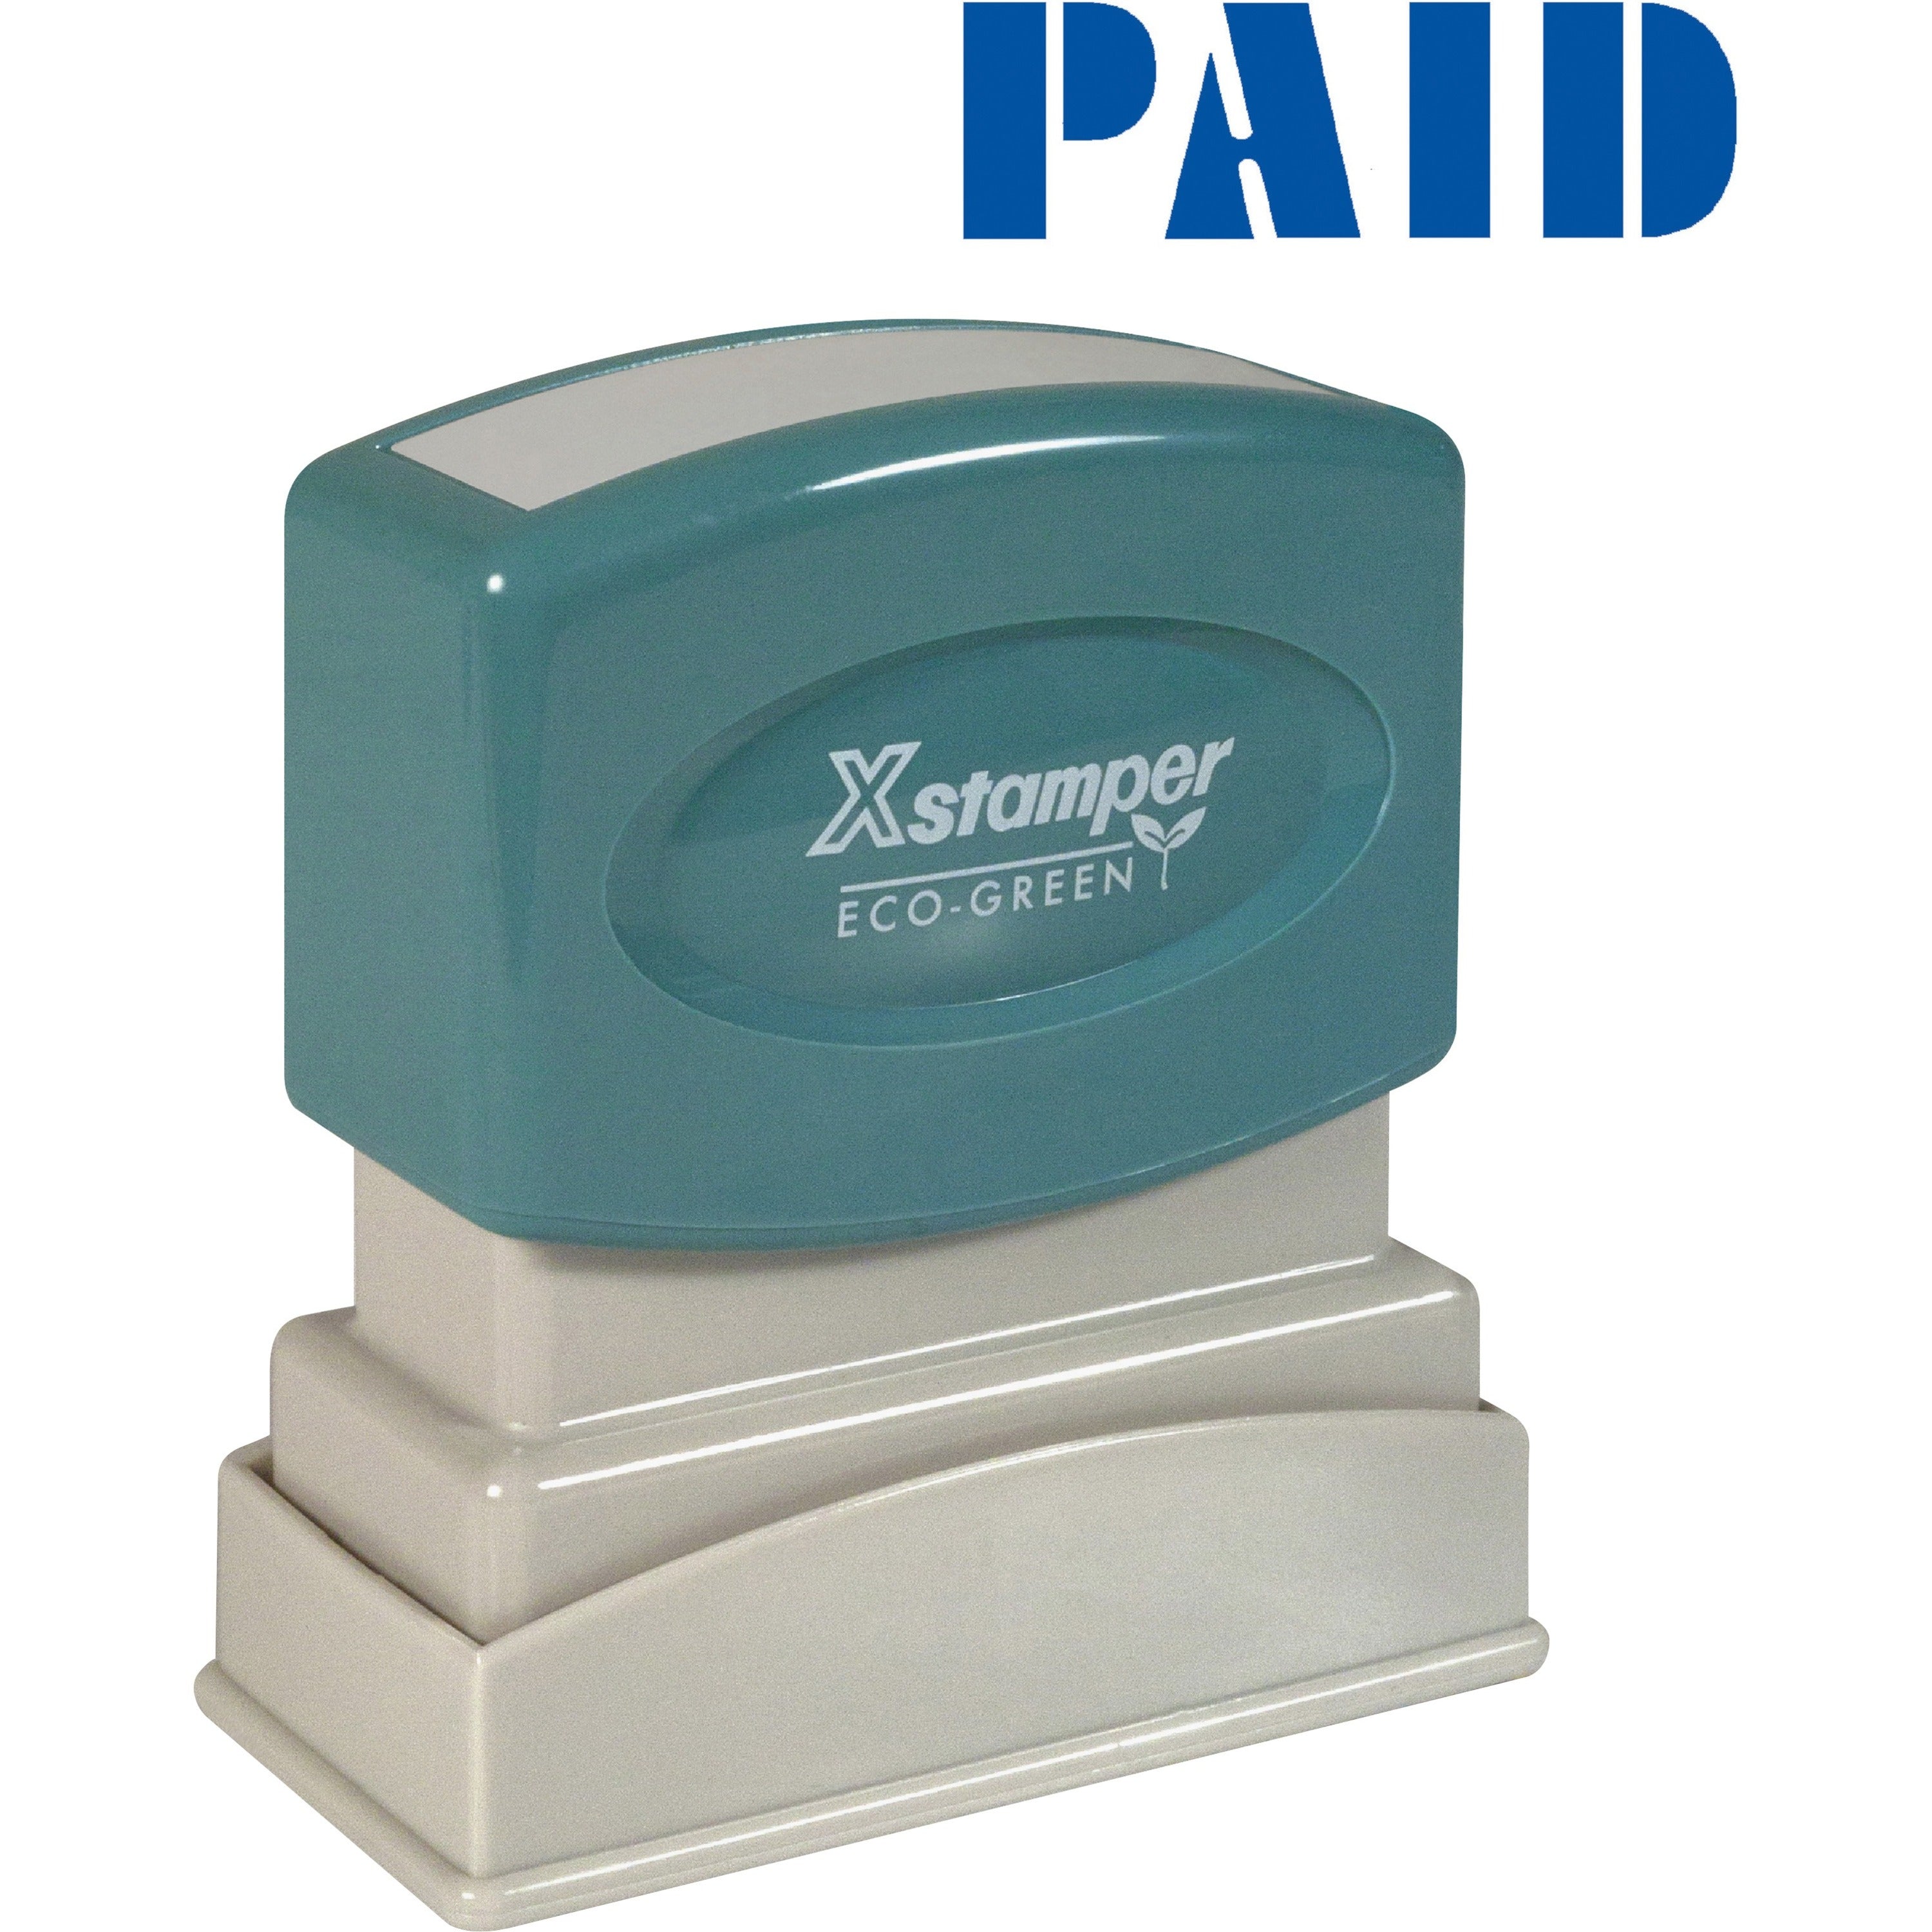 Xstamper Blue PAID Title Stamp - Message Stamp - "PAID" - 0.50" Impression Width x 1.62" Impression Length - 100000 Impression(s) - Blue - Recycled - 1 Each - 